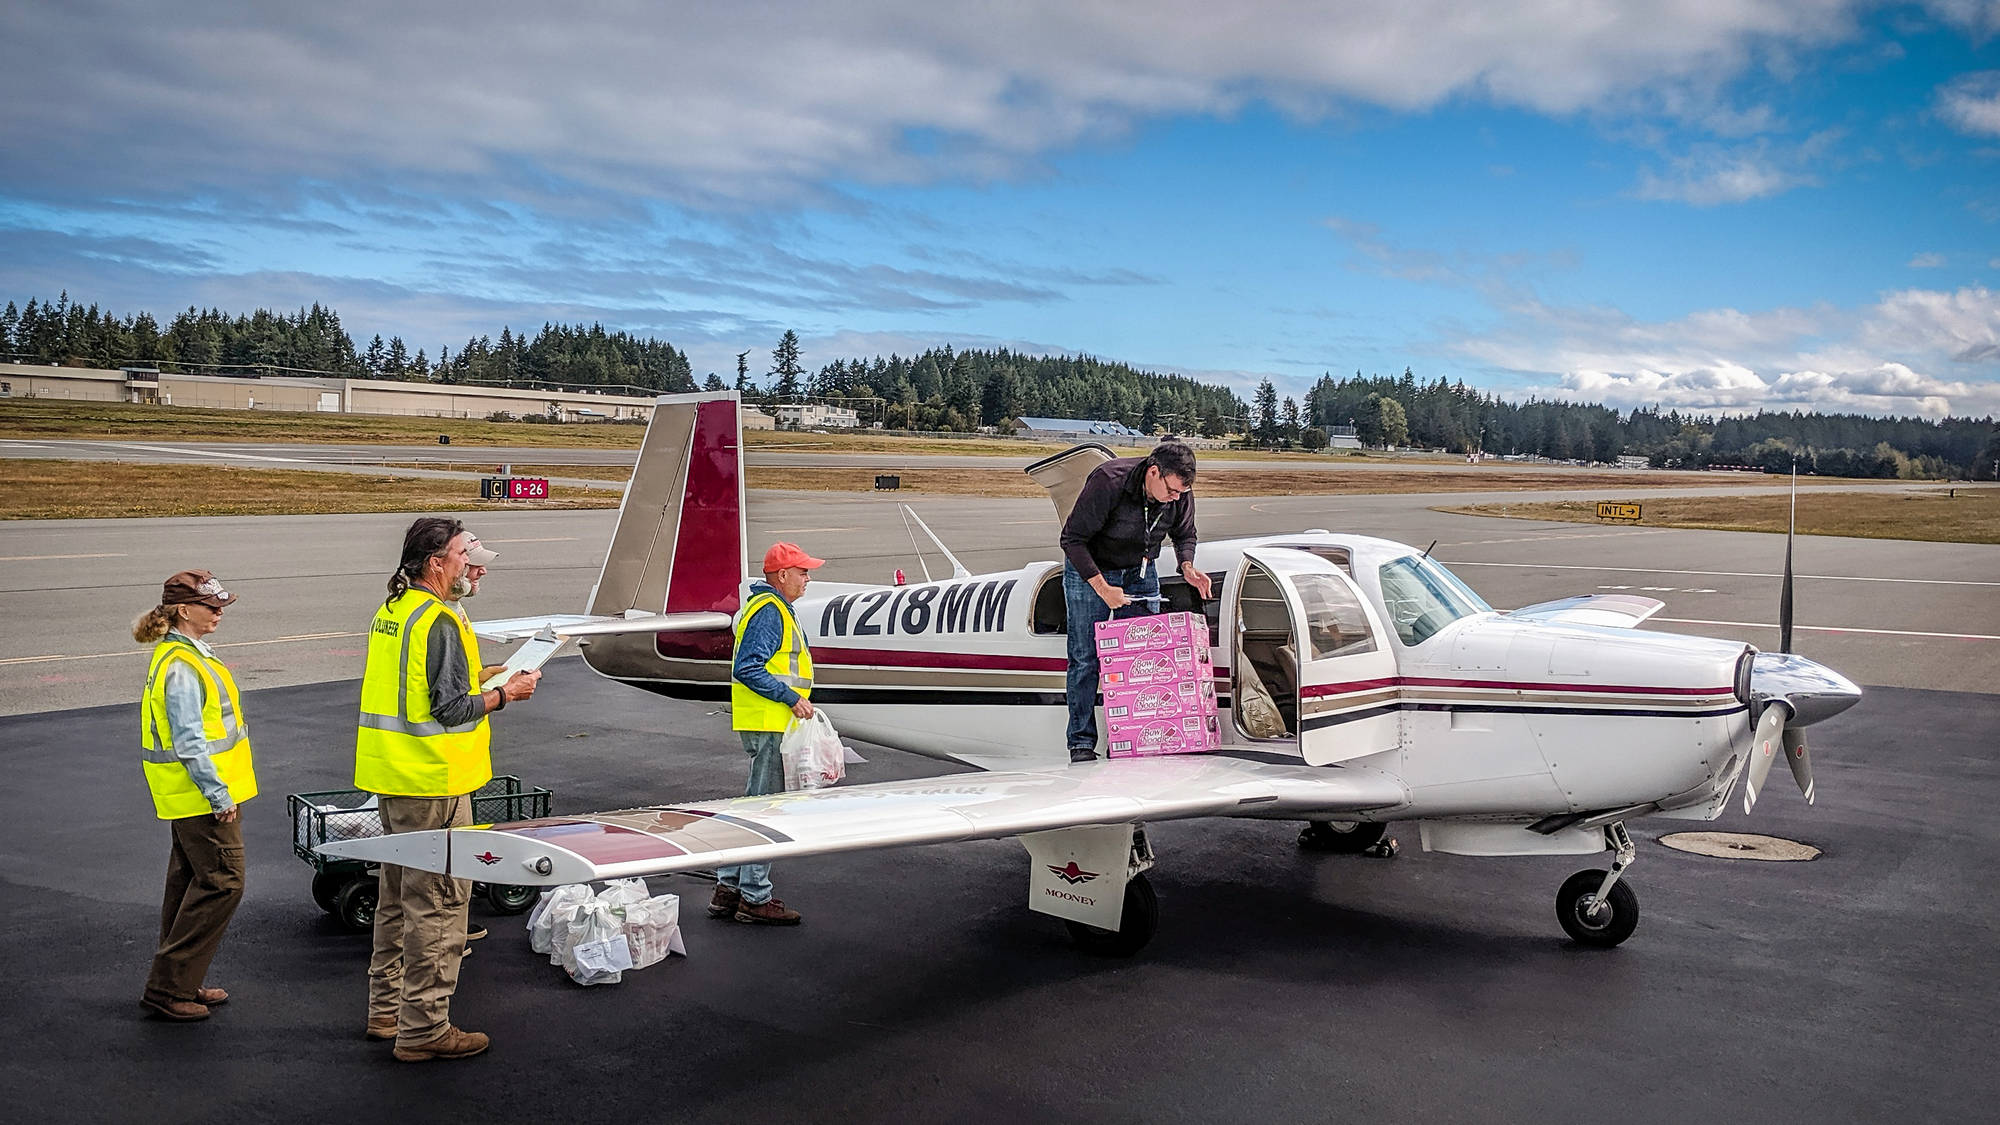 DART exercise delivers 5,000 pounds of food to Jefferson County food banks
			Disaster Airlift Response Team work involved 50 volunteers, 25 pilots, 29 flights